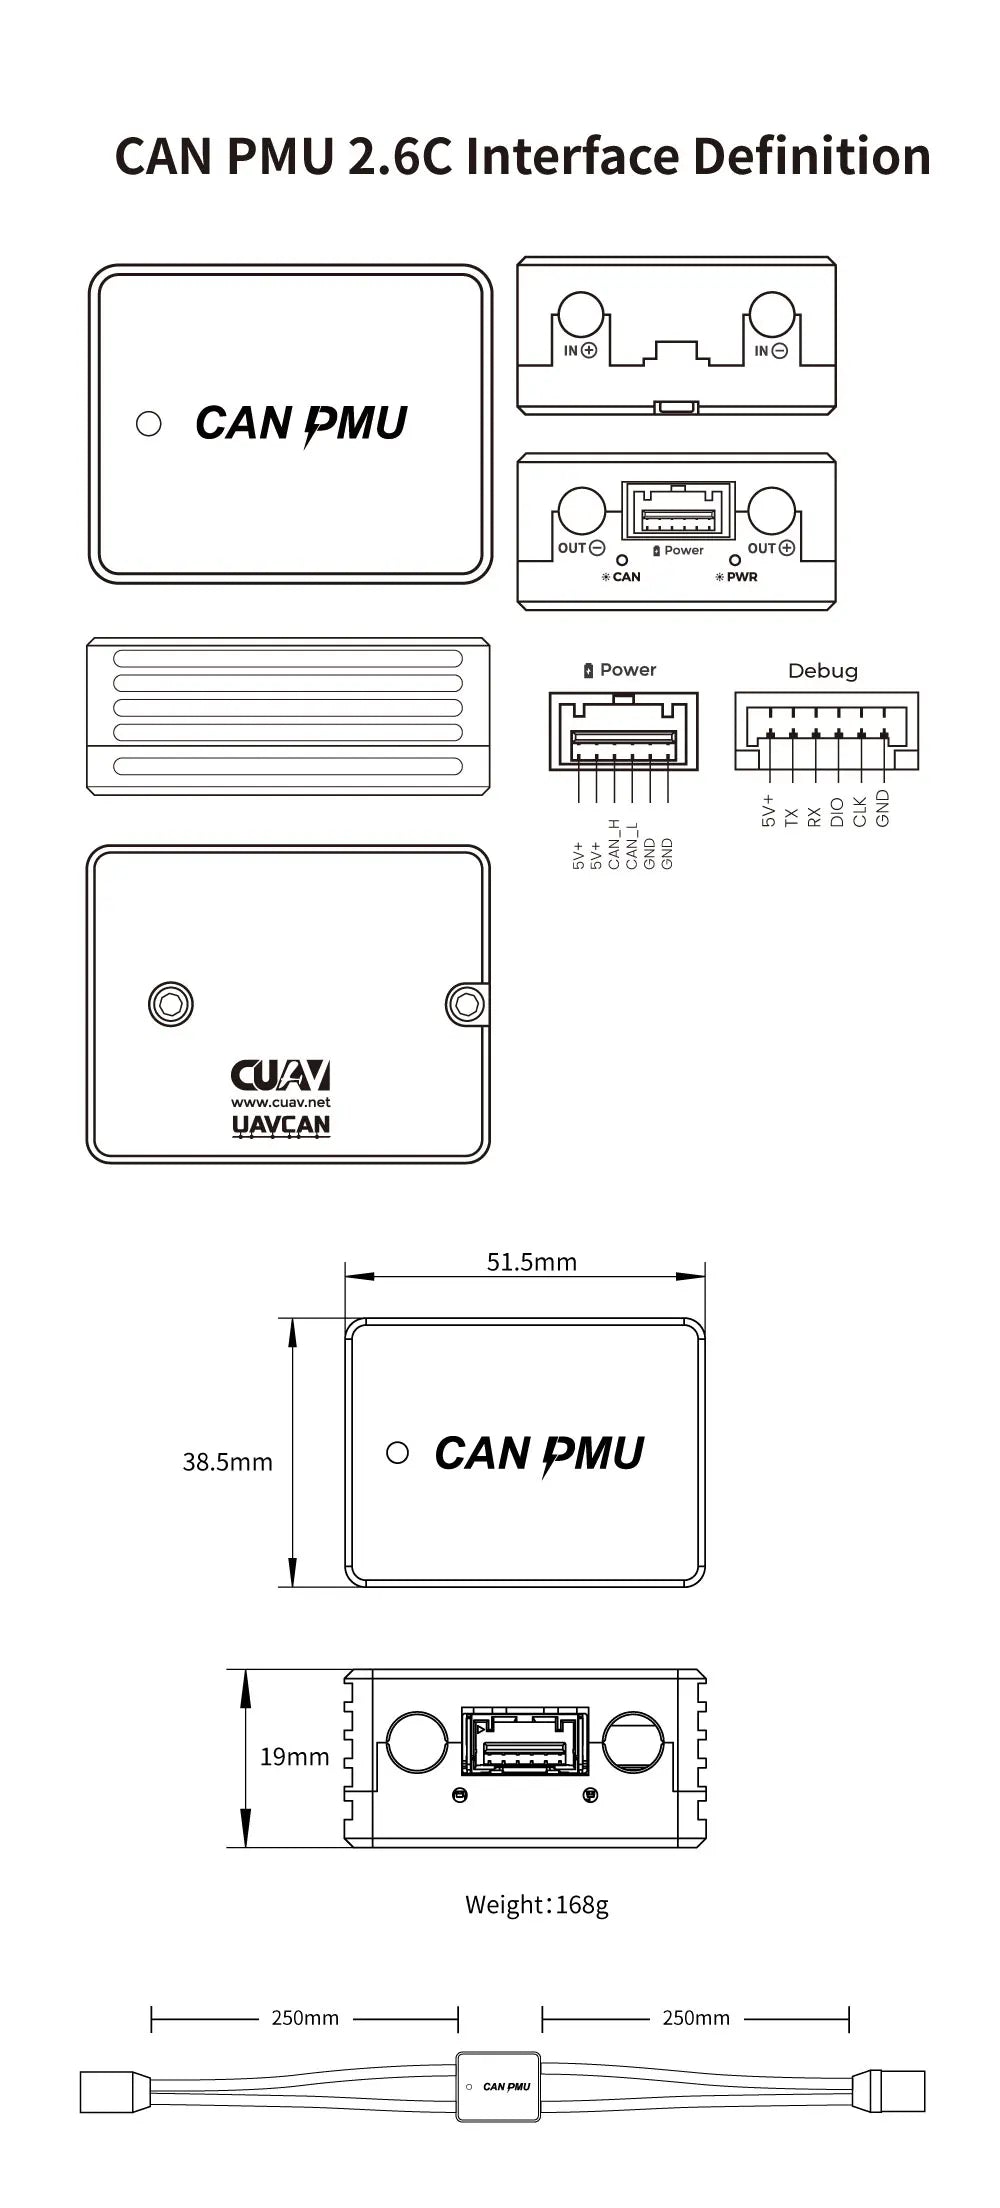 CUAV New PIX CAN PMU, CAN PMU 2.6C Interface Definition IN 0 INO Power out0 CAN